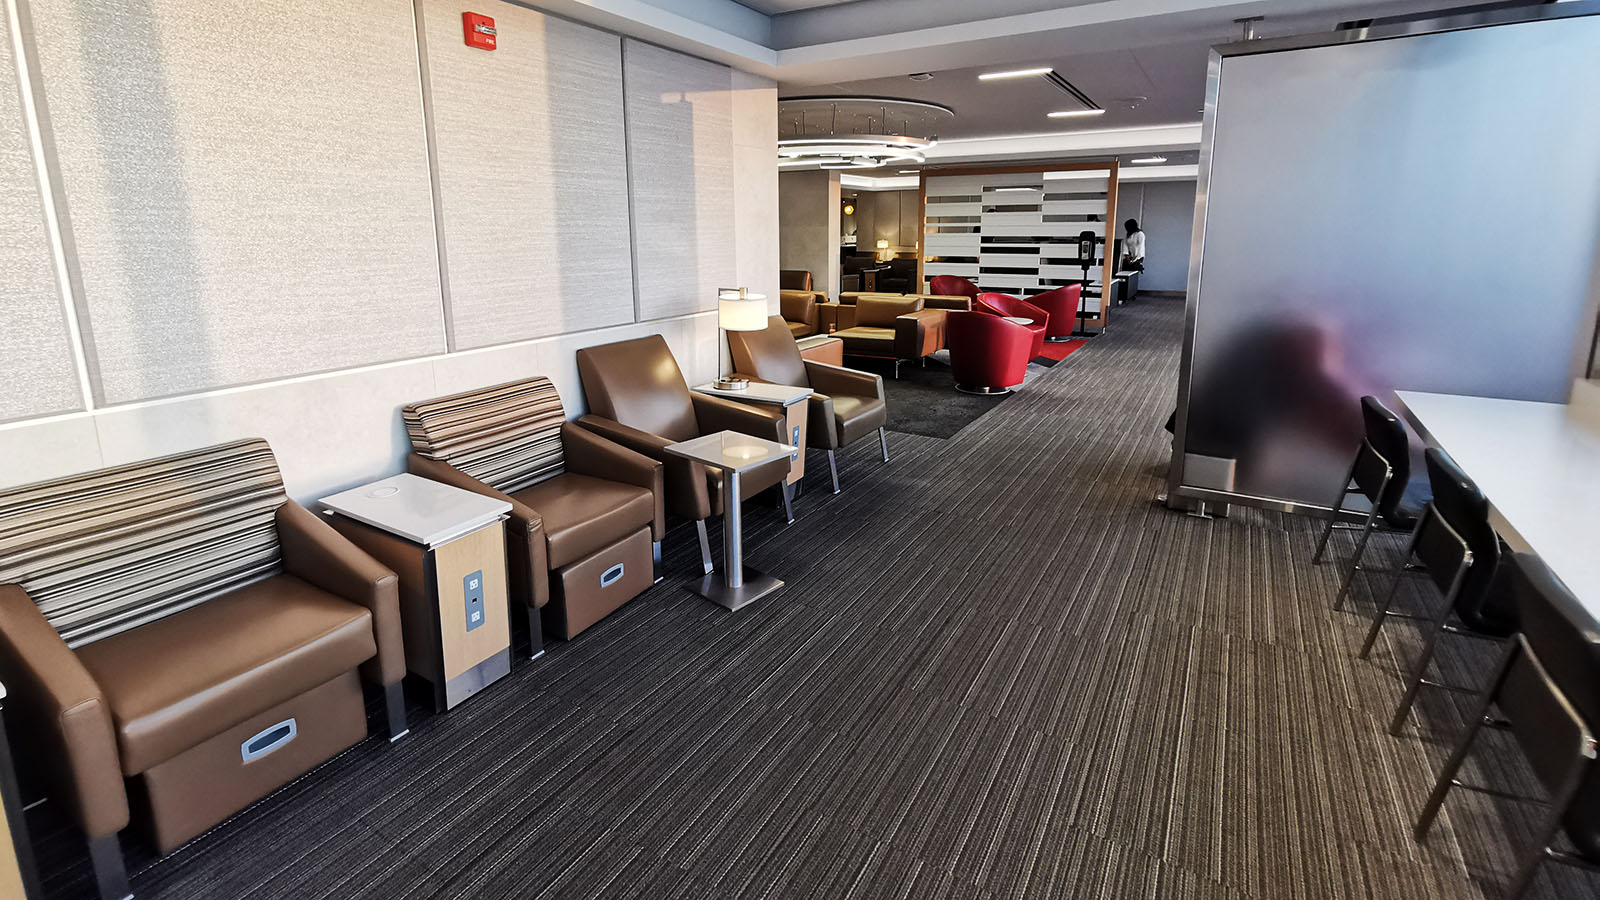 More seats at AA's Flagship Lounge in Chicago